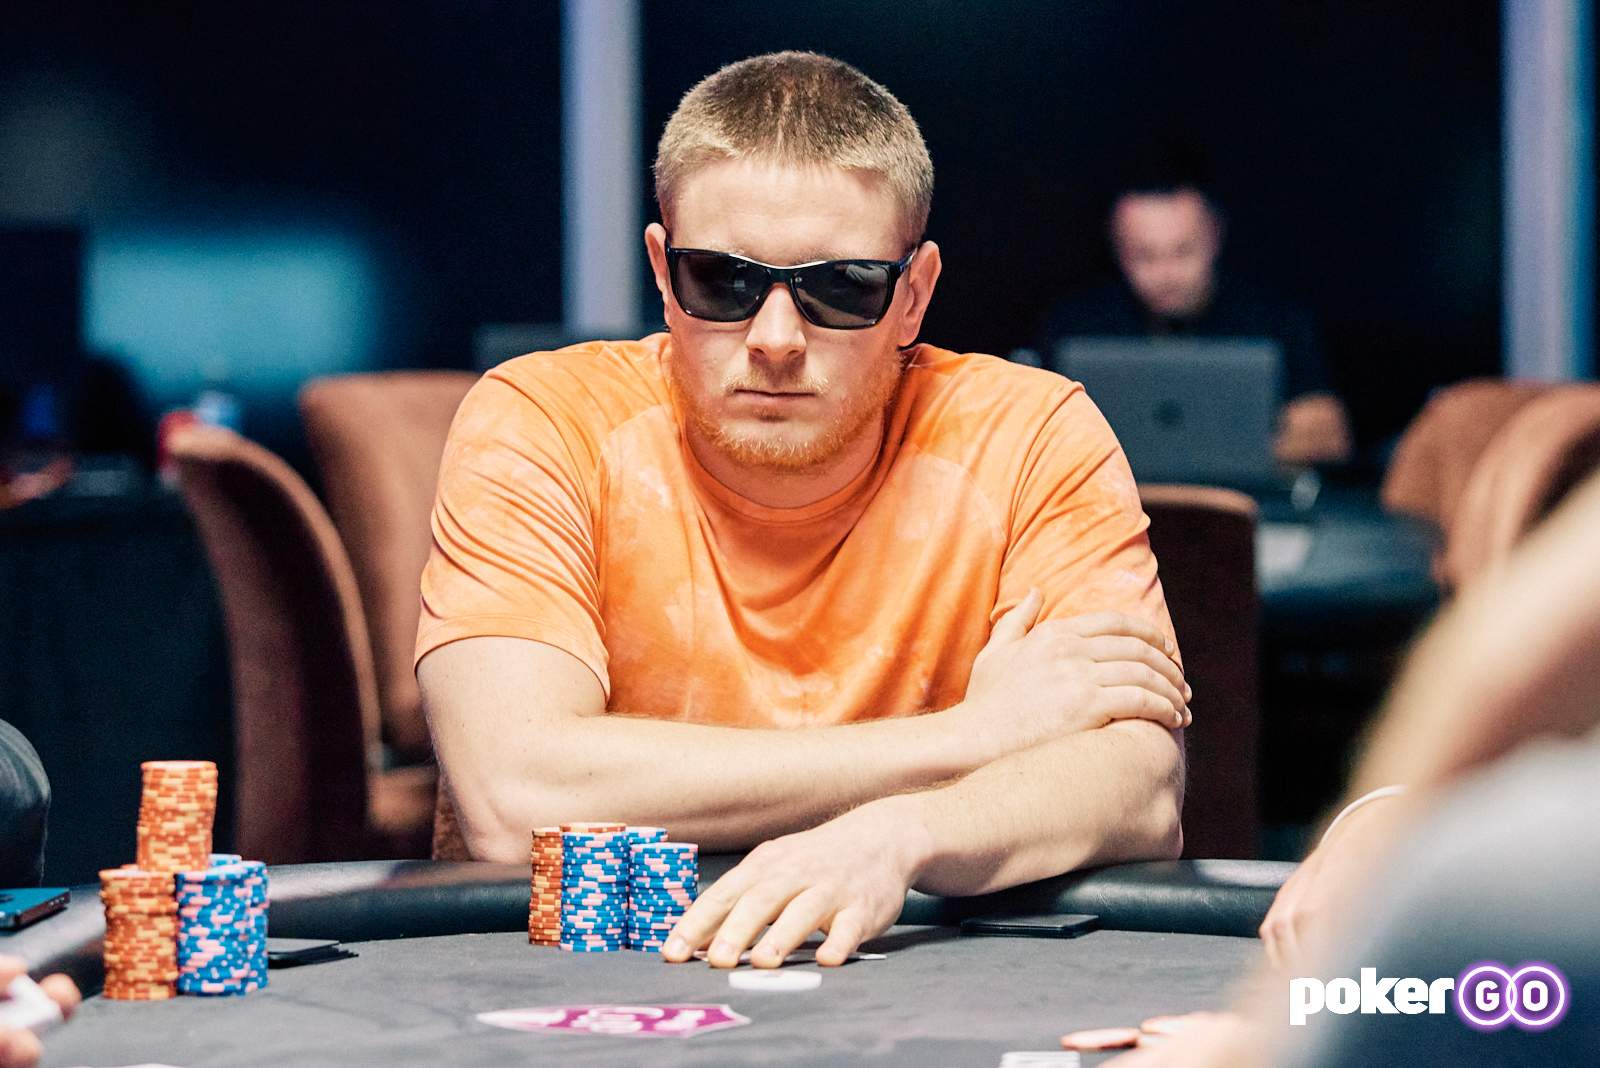 Sam Soverel Leads the Final Table of Event: #8 $100,000 No-Limit Hold'em: Soverel and Daniel Negreanu Still in Contention for the PokerGO Cup